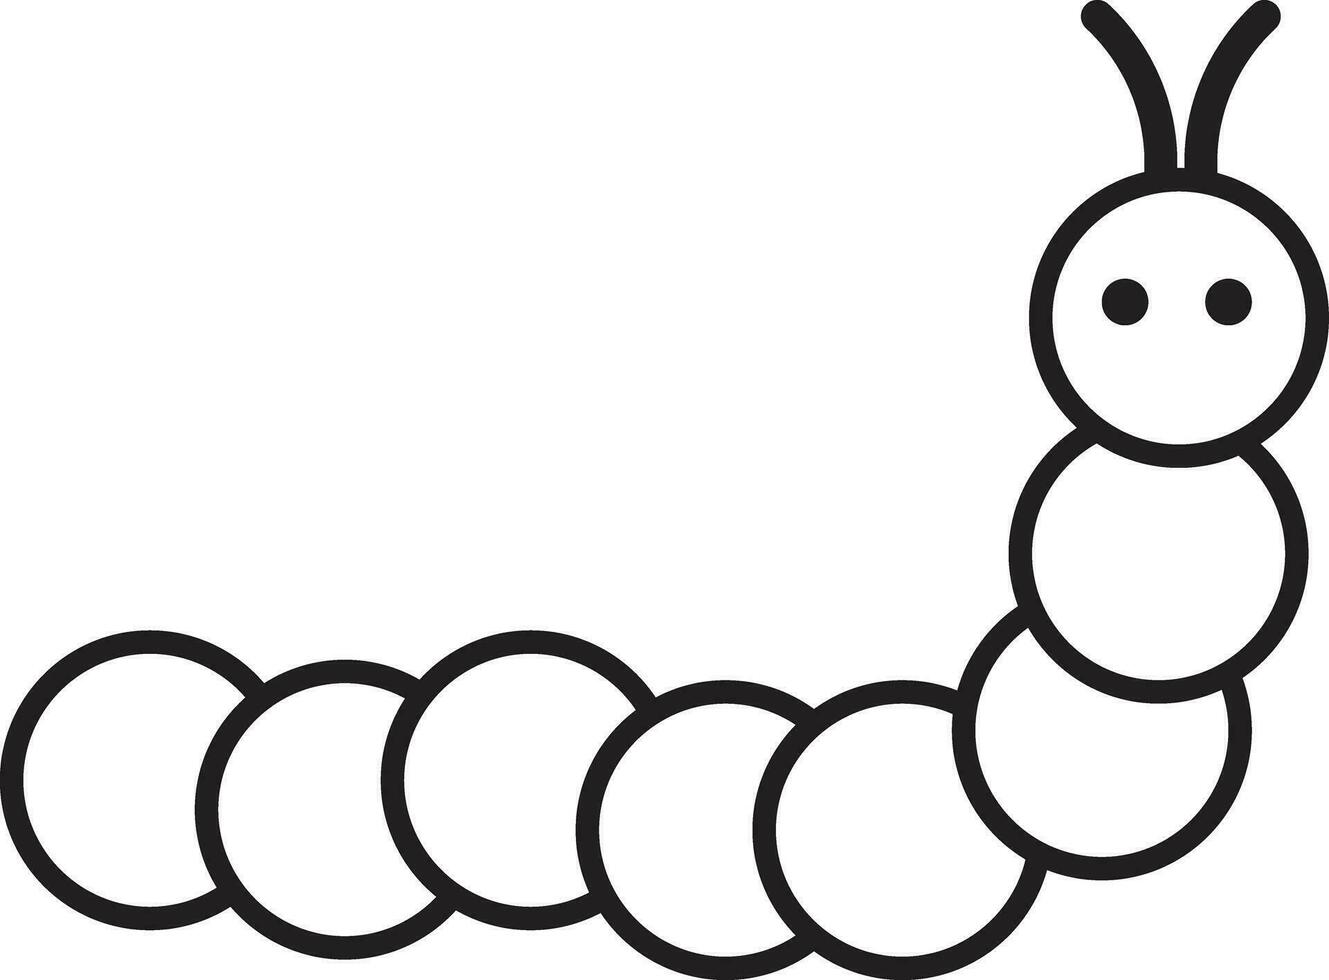 Caterpillar icon isolated on white background . Worm icon . Vector illustration